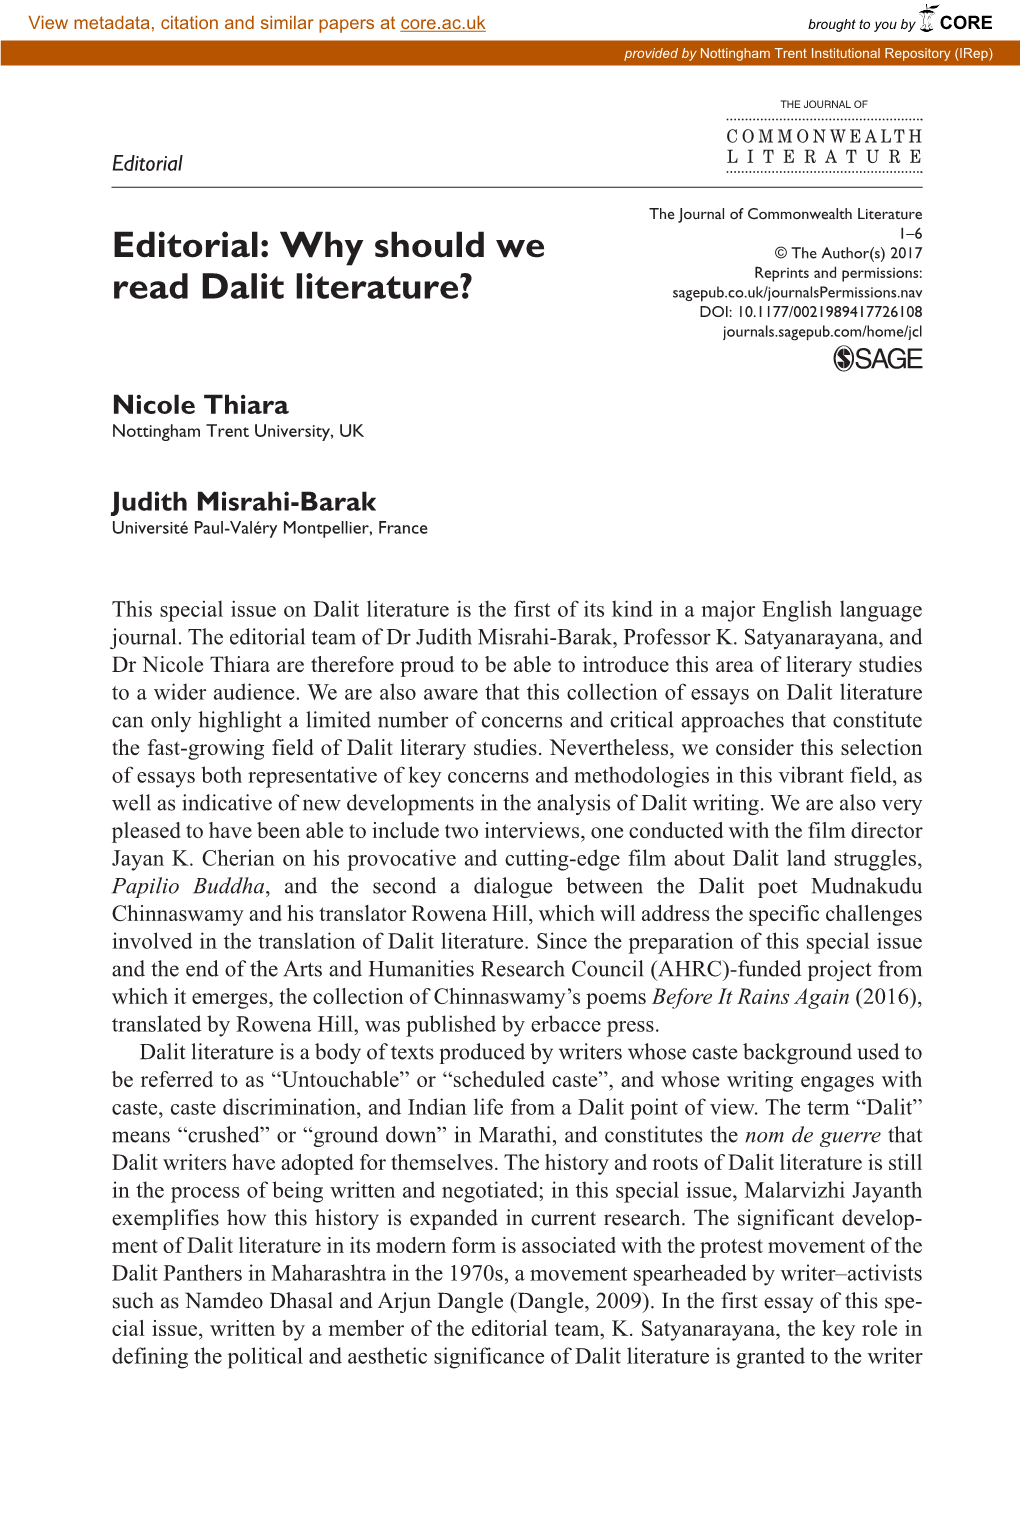 Why Should We Read Dalit Literature?